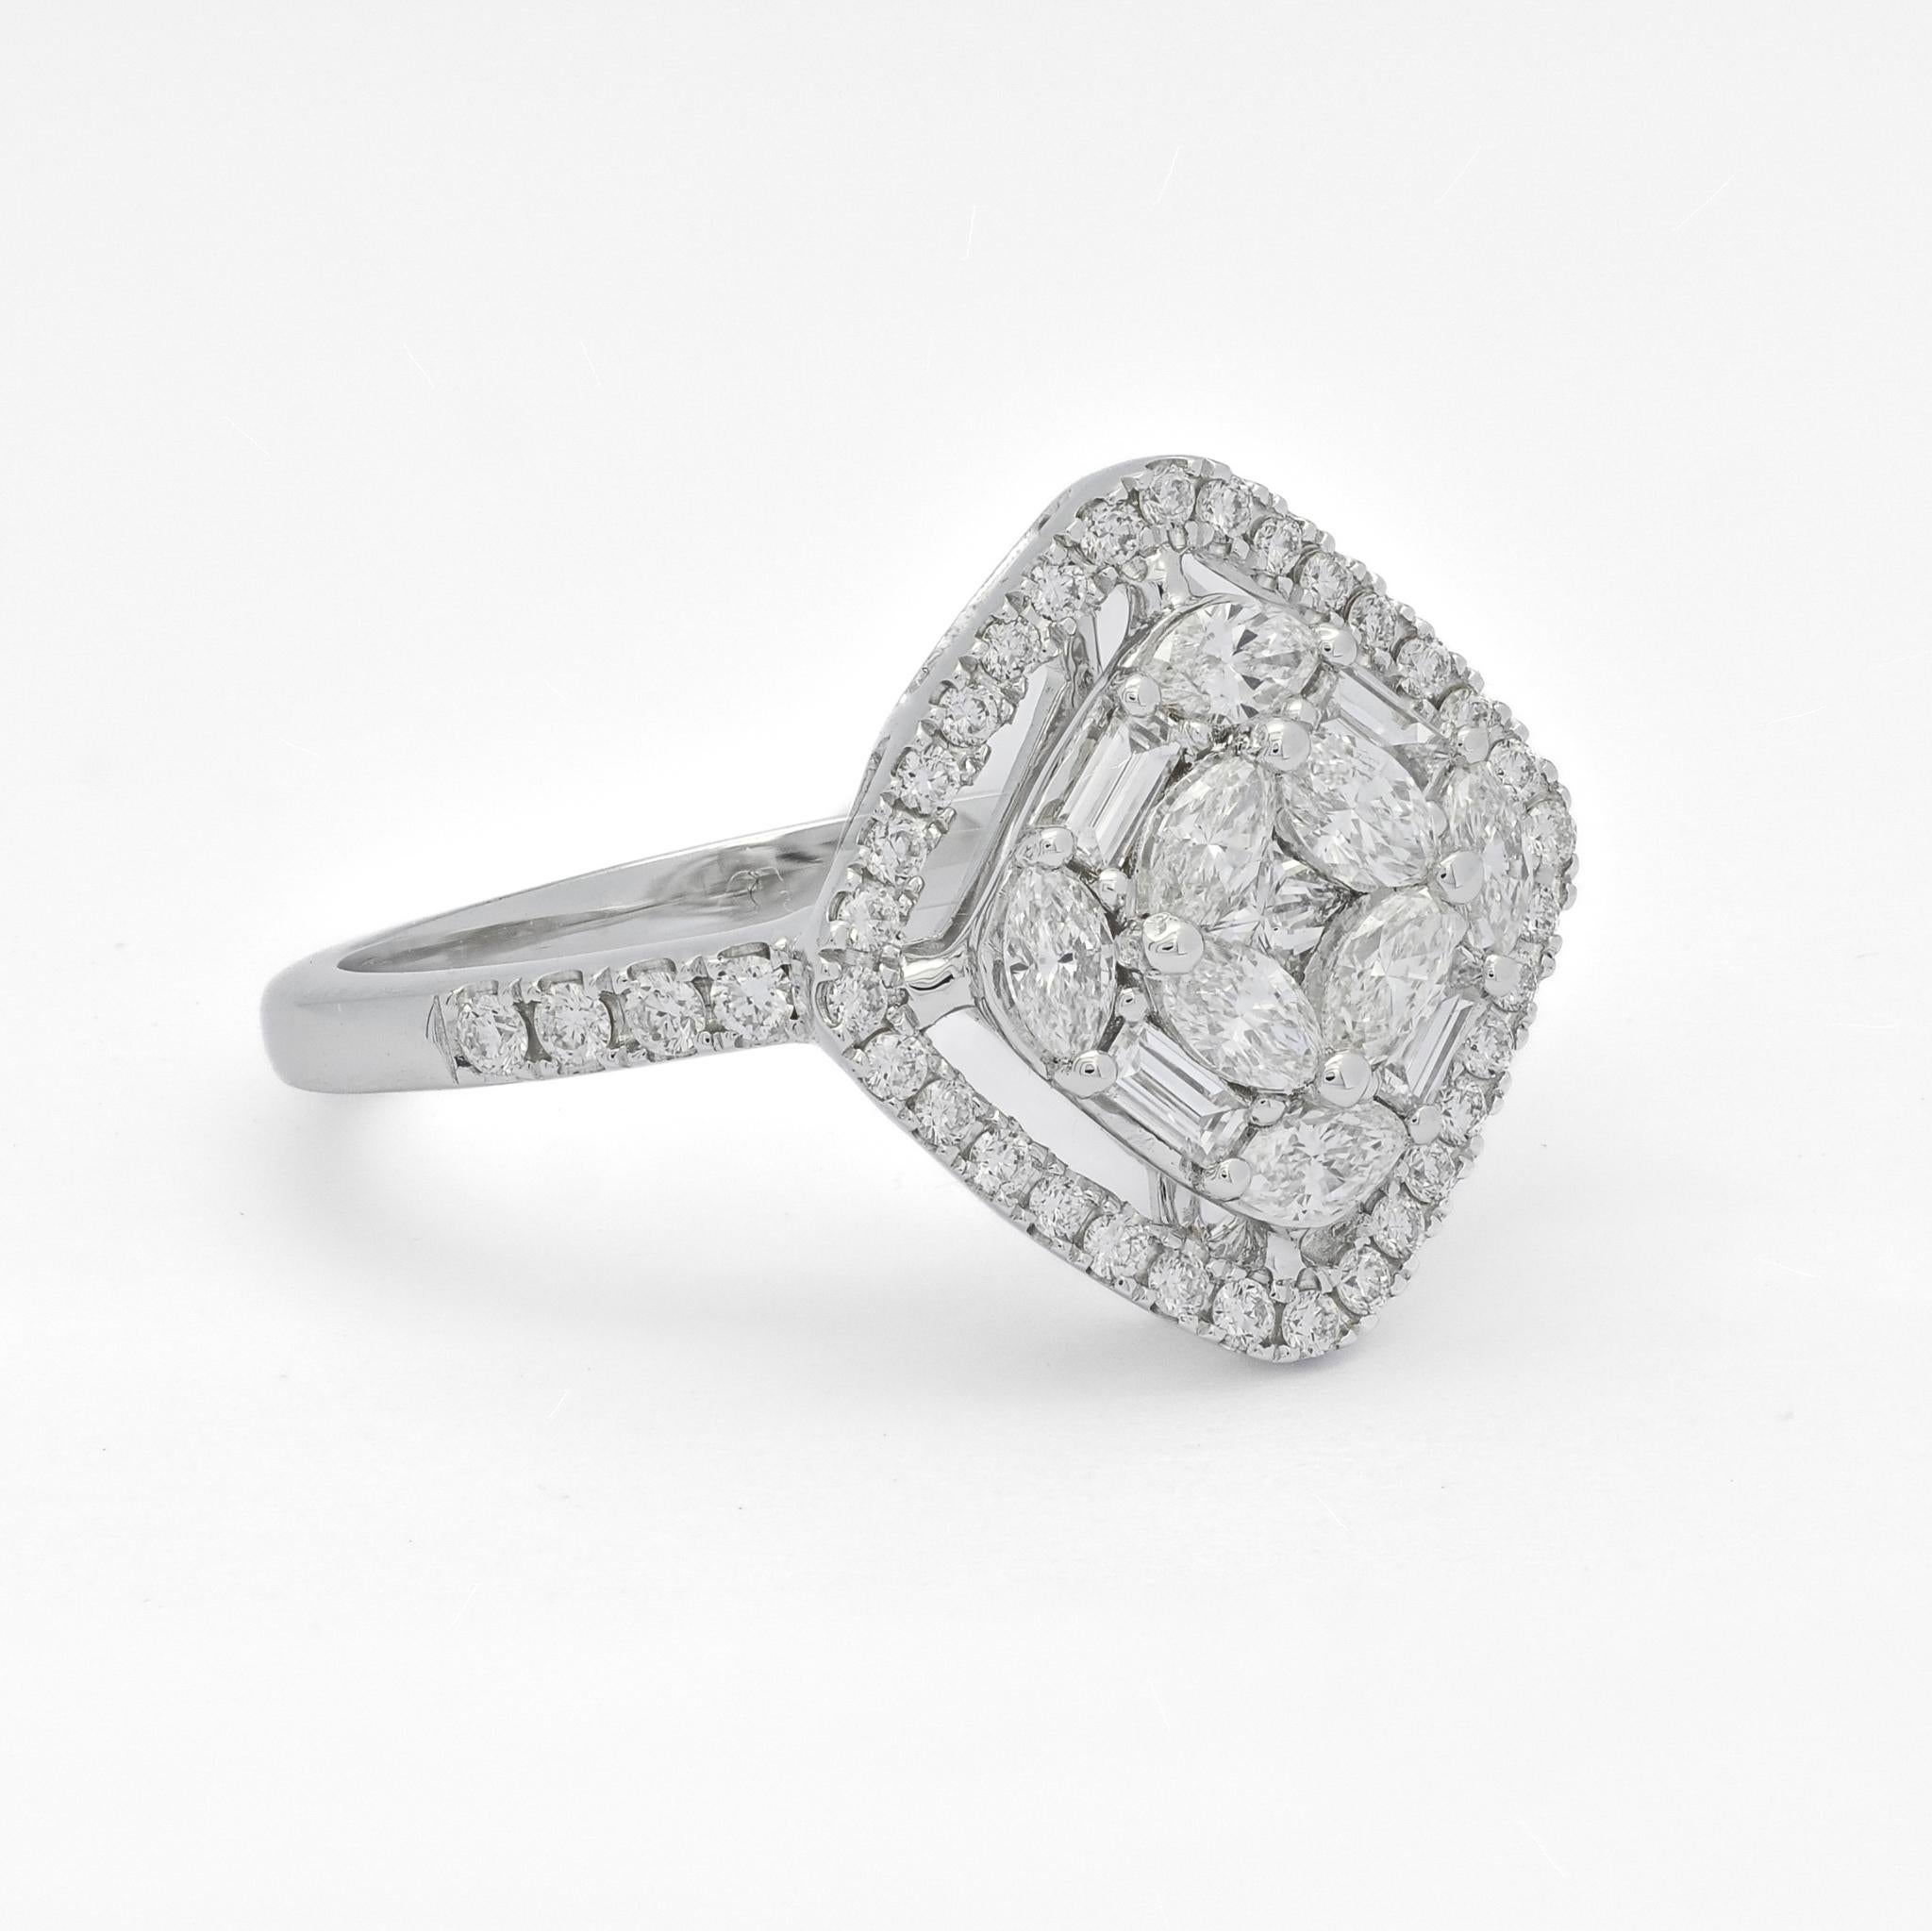 Prepare to be captivated by the sheer brilliance of this stunning ring, adorned with a dazzling array of Baguette, Princess, Marquise, and round-shape diamonds set in luxurious 18k white gold. With a total carat weight of 1.00 carats, this ring